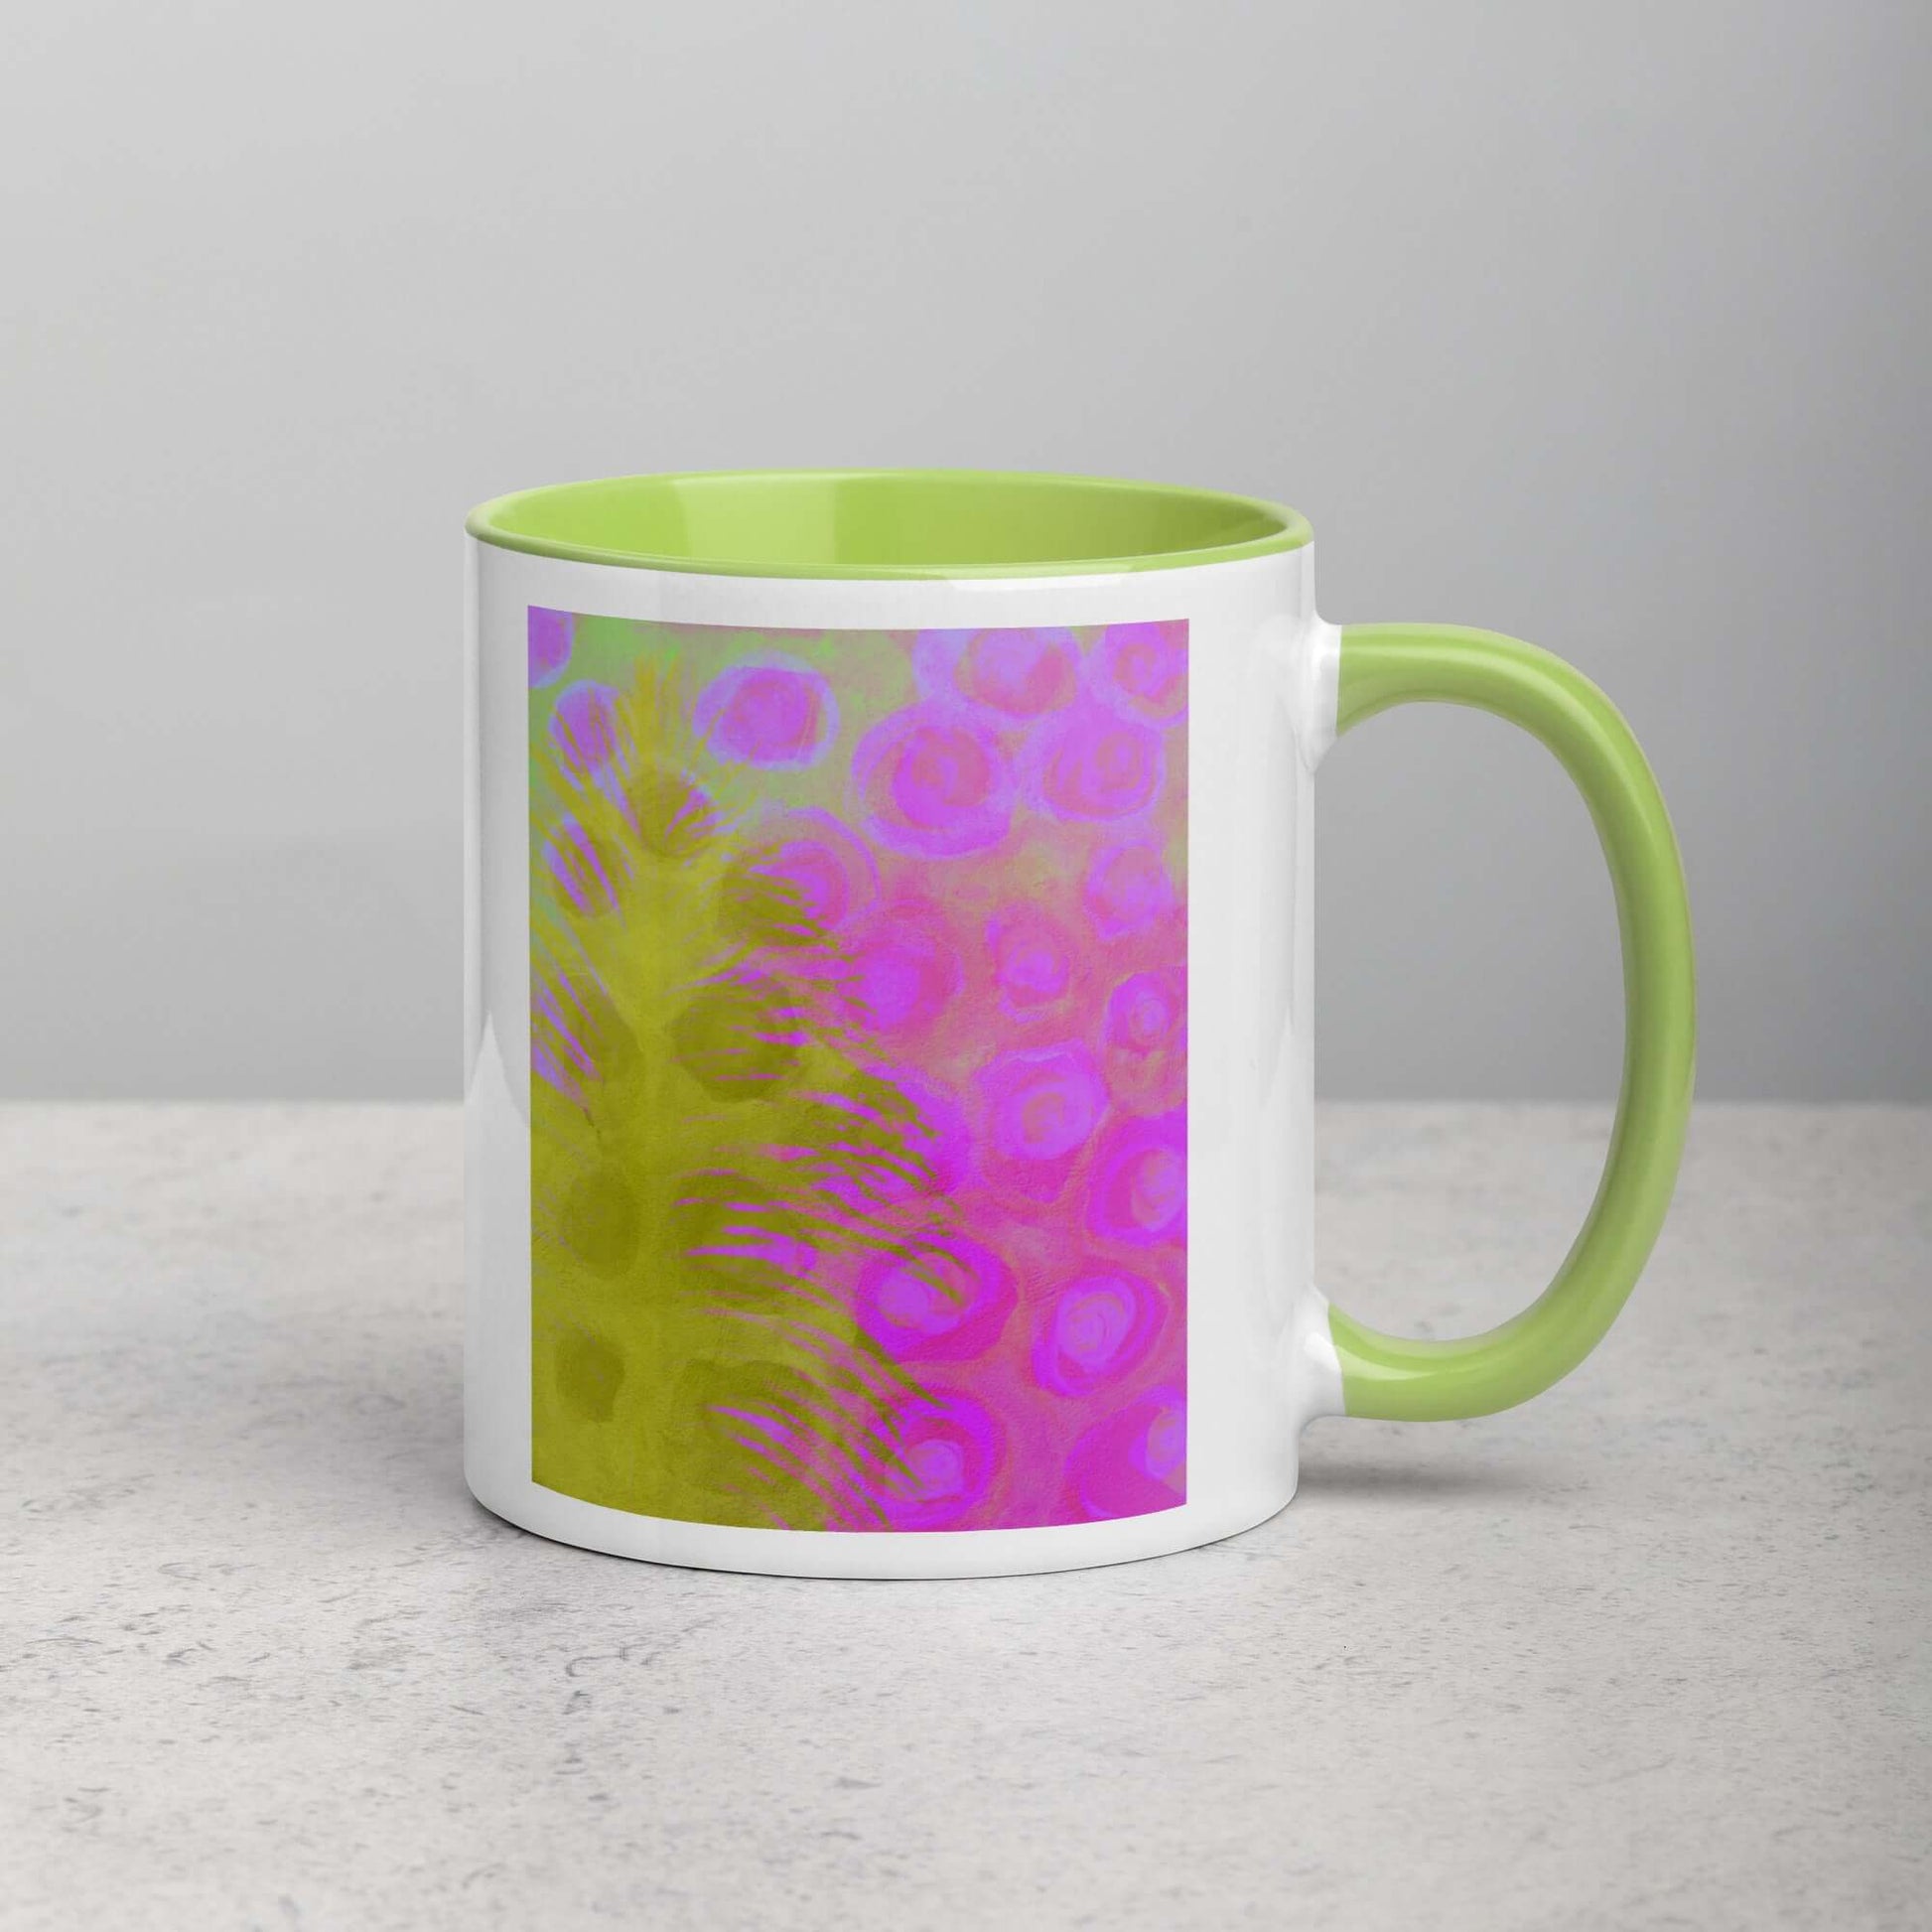 Olive Green Ostrich Feather on Pinkish-Purple Background “Olivine” Abstract Art Mug with Lime Green Color Inside Right Handed Front View